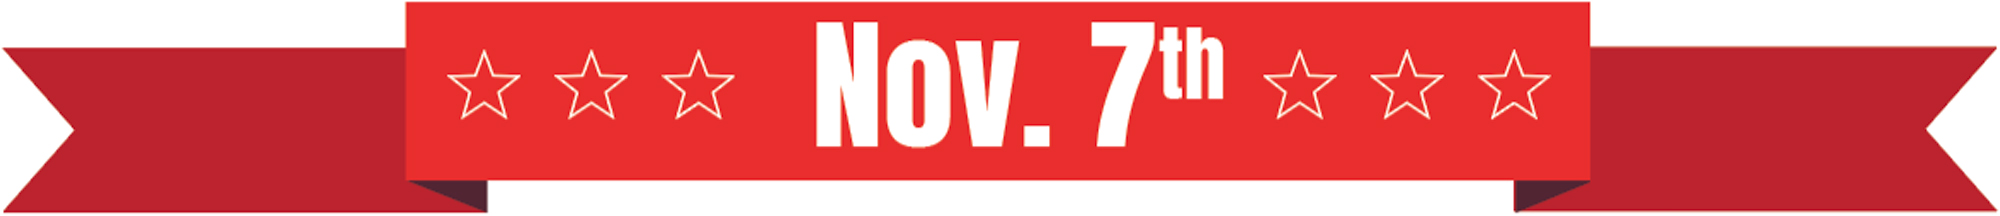 Red Banner with Nov. 7th typography